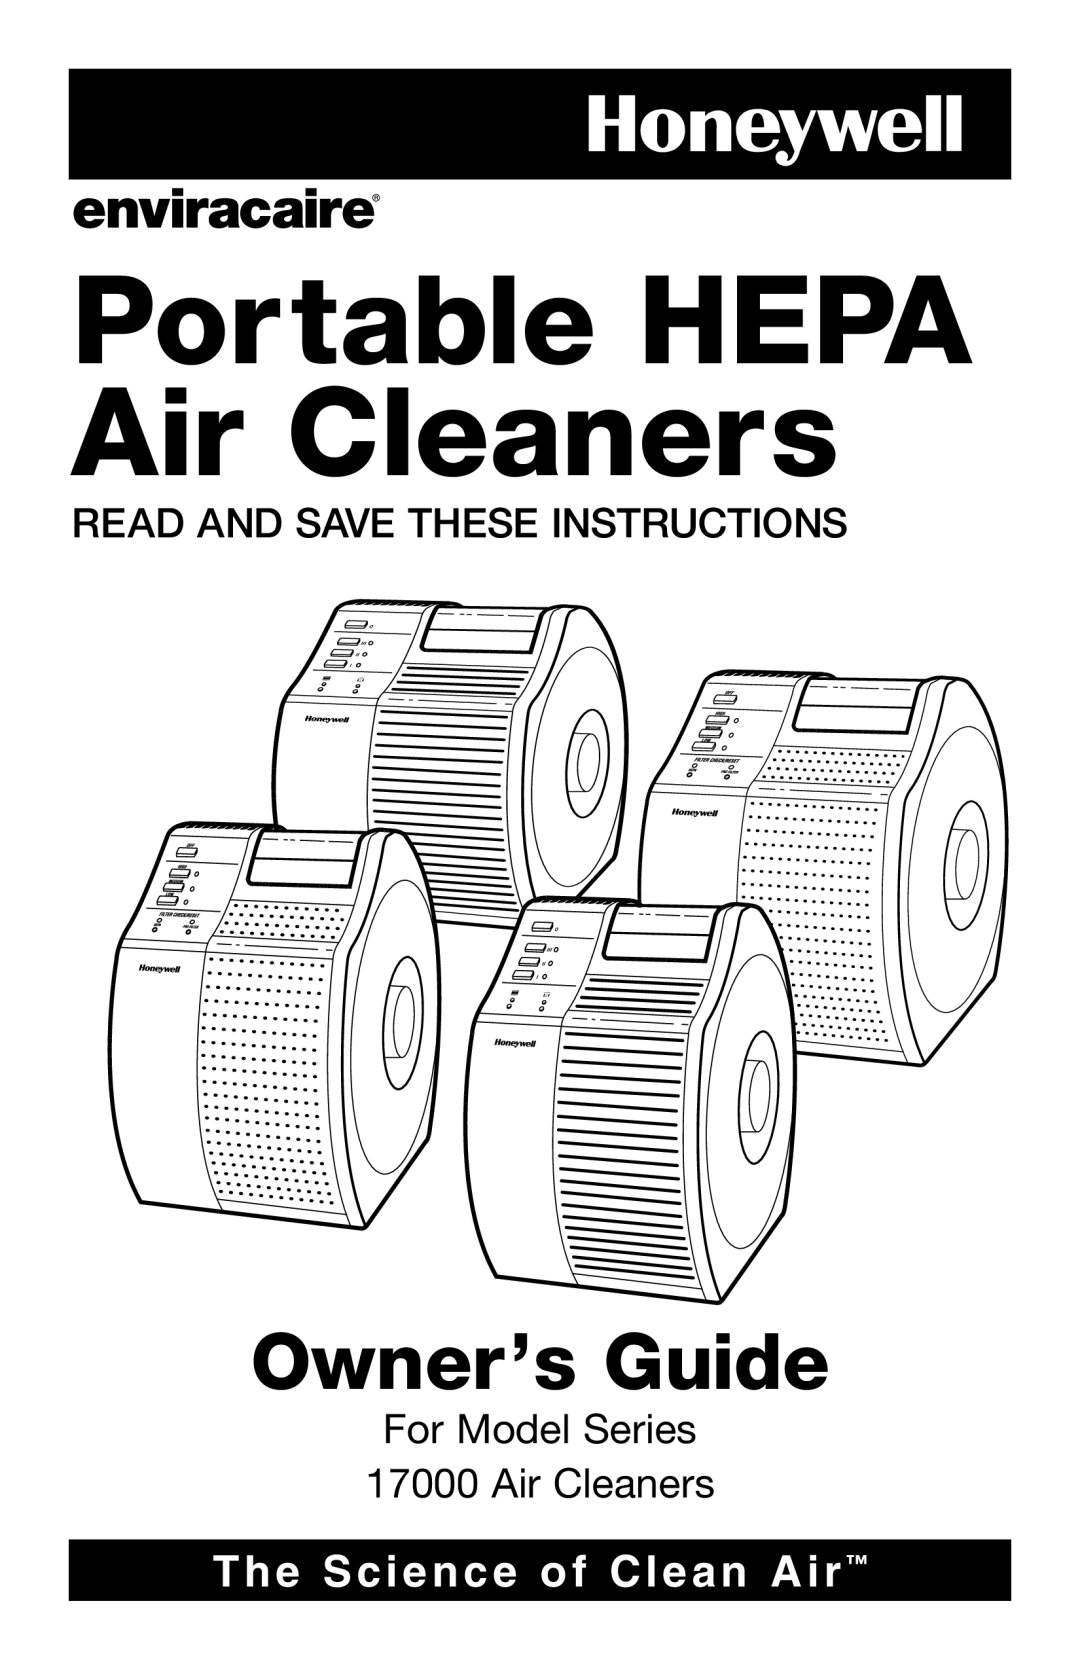 Honeywell 17000 manual Portable HEPA Air Cleaners, Owner’s Guide, The Science of Clean Air 